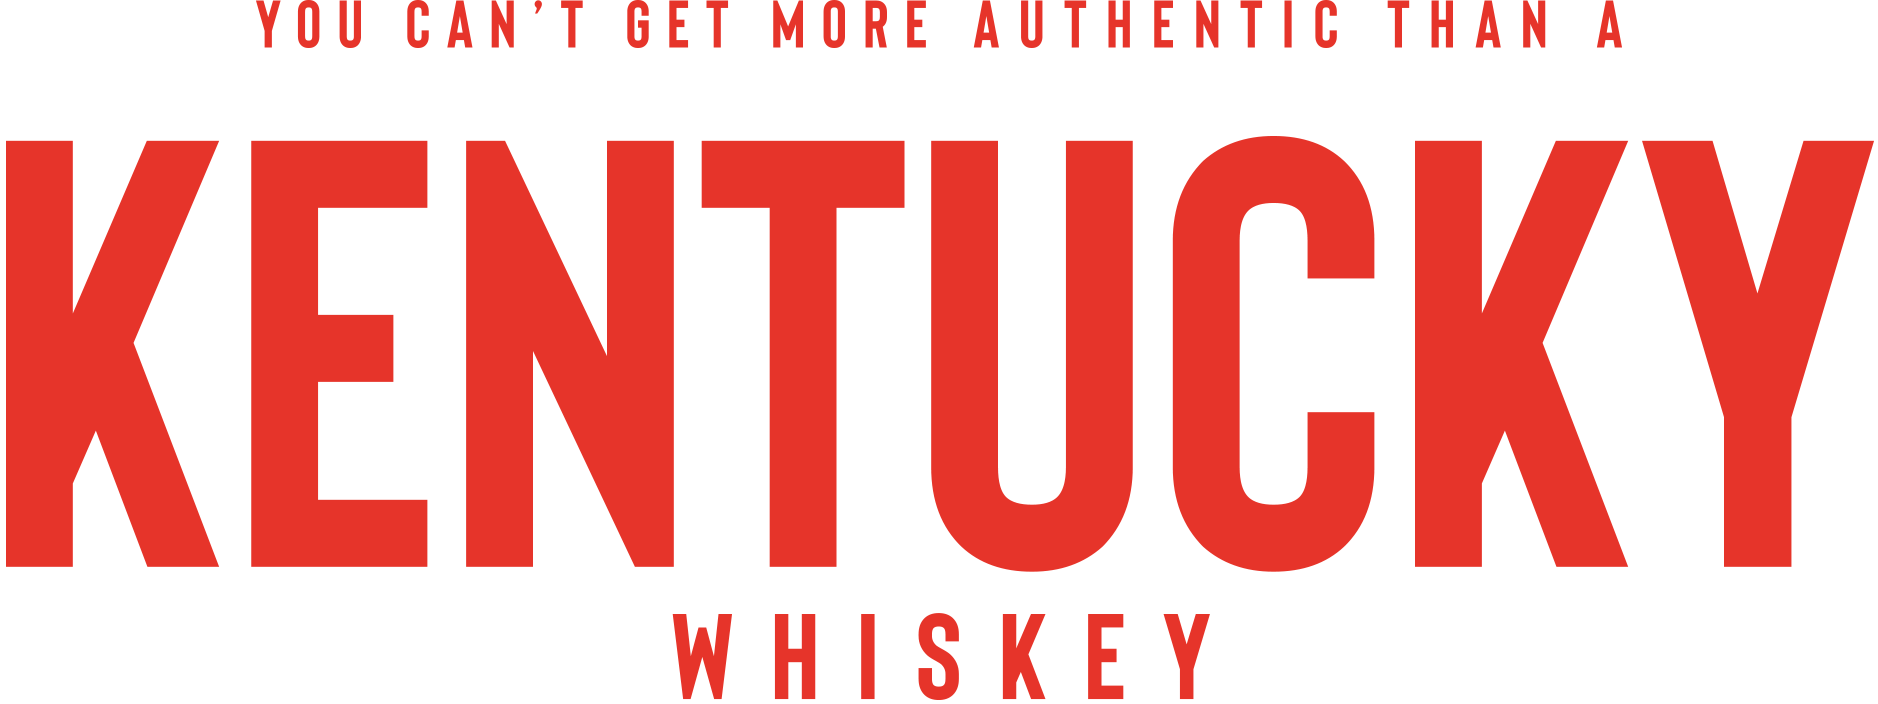 You can't get more authentic than a Kentucky Whiskey